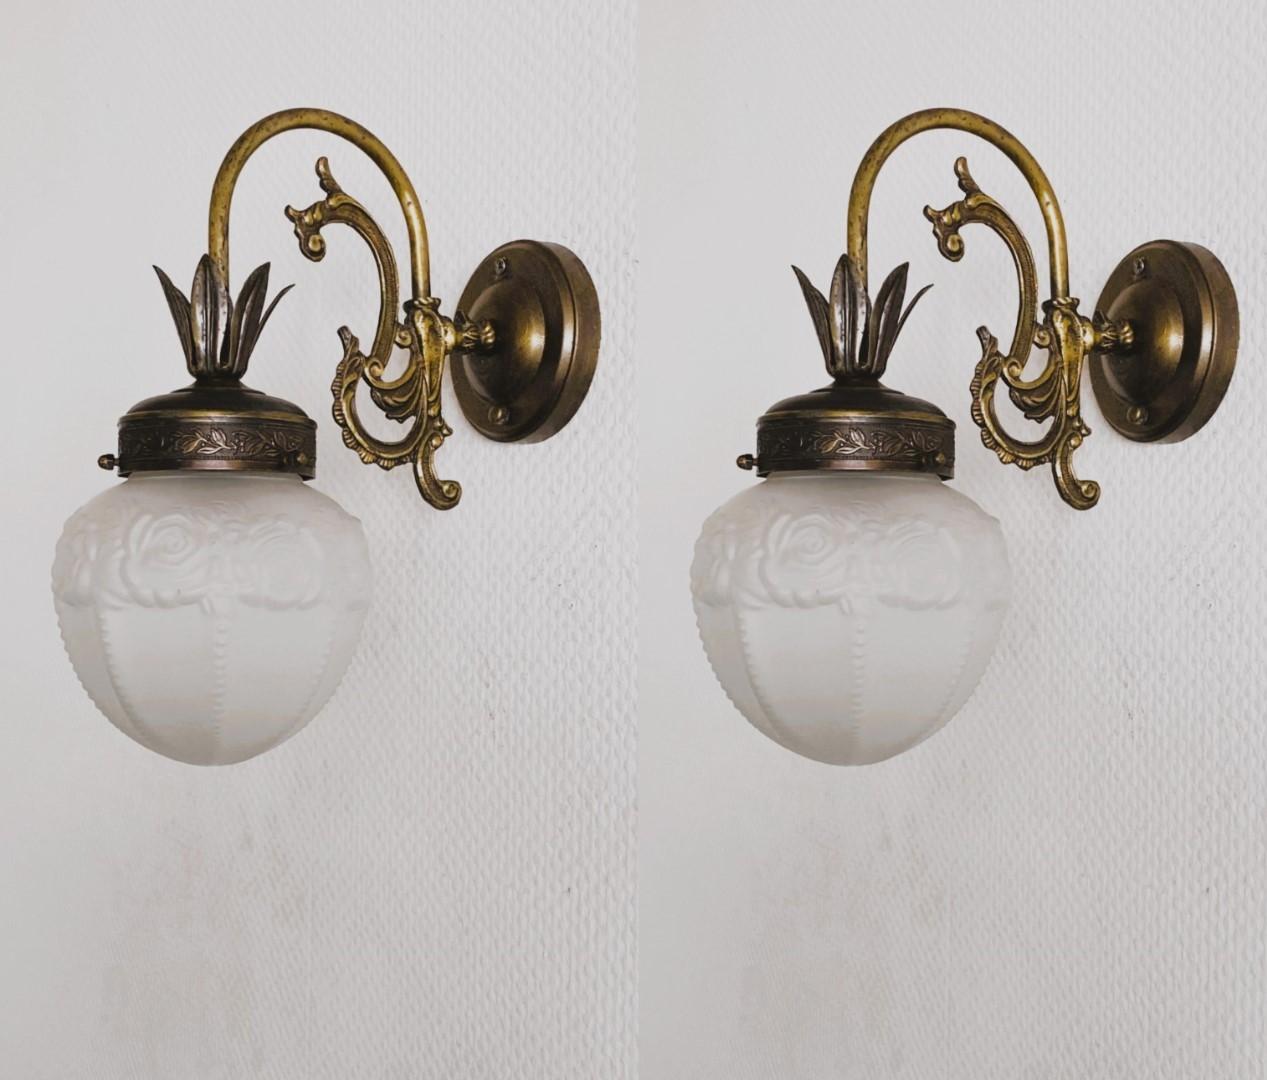 Pair of bronzed brass wall lights with frosted art glass globes, for indoor or covered outdoor use, France, 1930-1939. All wall sconces are in very good condition, beautiful patina, no ships or cracks, rewired. Each sconce takes one Edison E14 screw